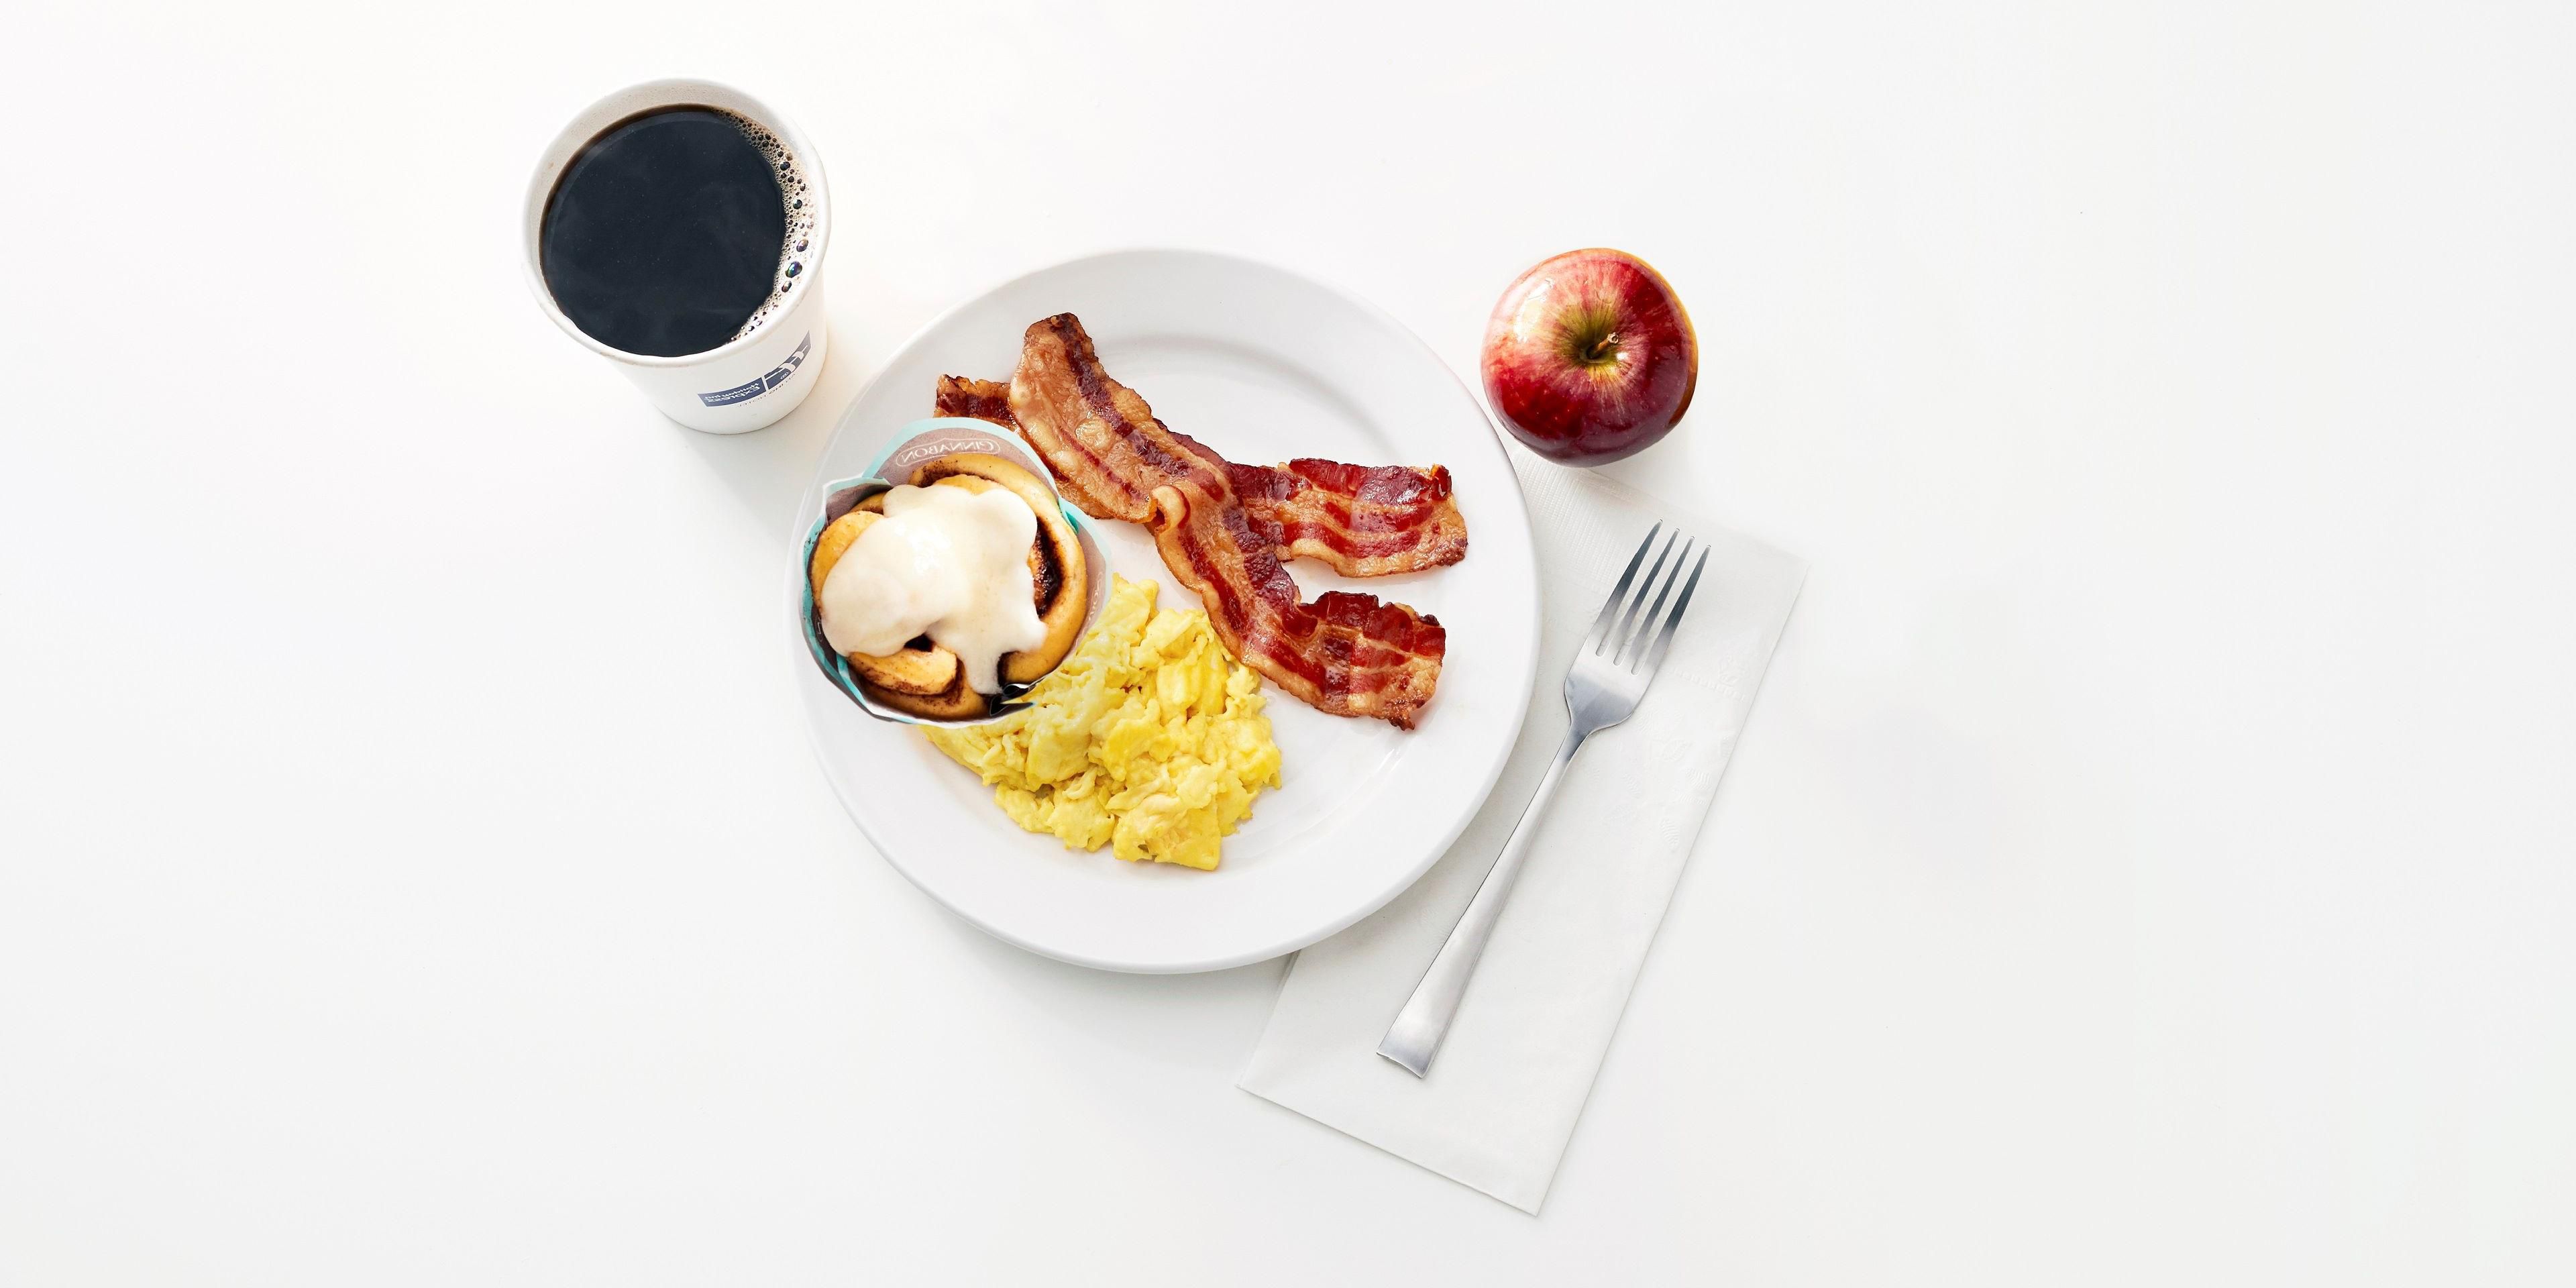 Kick start your day with our free Express Start Breakfast, with grab ‘n’ go options and favorites such as eggs and bacon, hot pancakes, our signature cinnamon rolls and fresh coffee. Offered from Monday - Friday from 6:30 AM - 9:30 AM and Saturday - Sunday from 7:00 AM - 10:00 AM. 